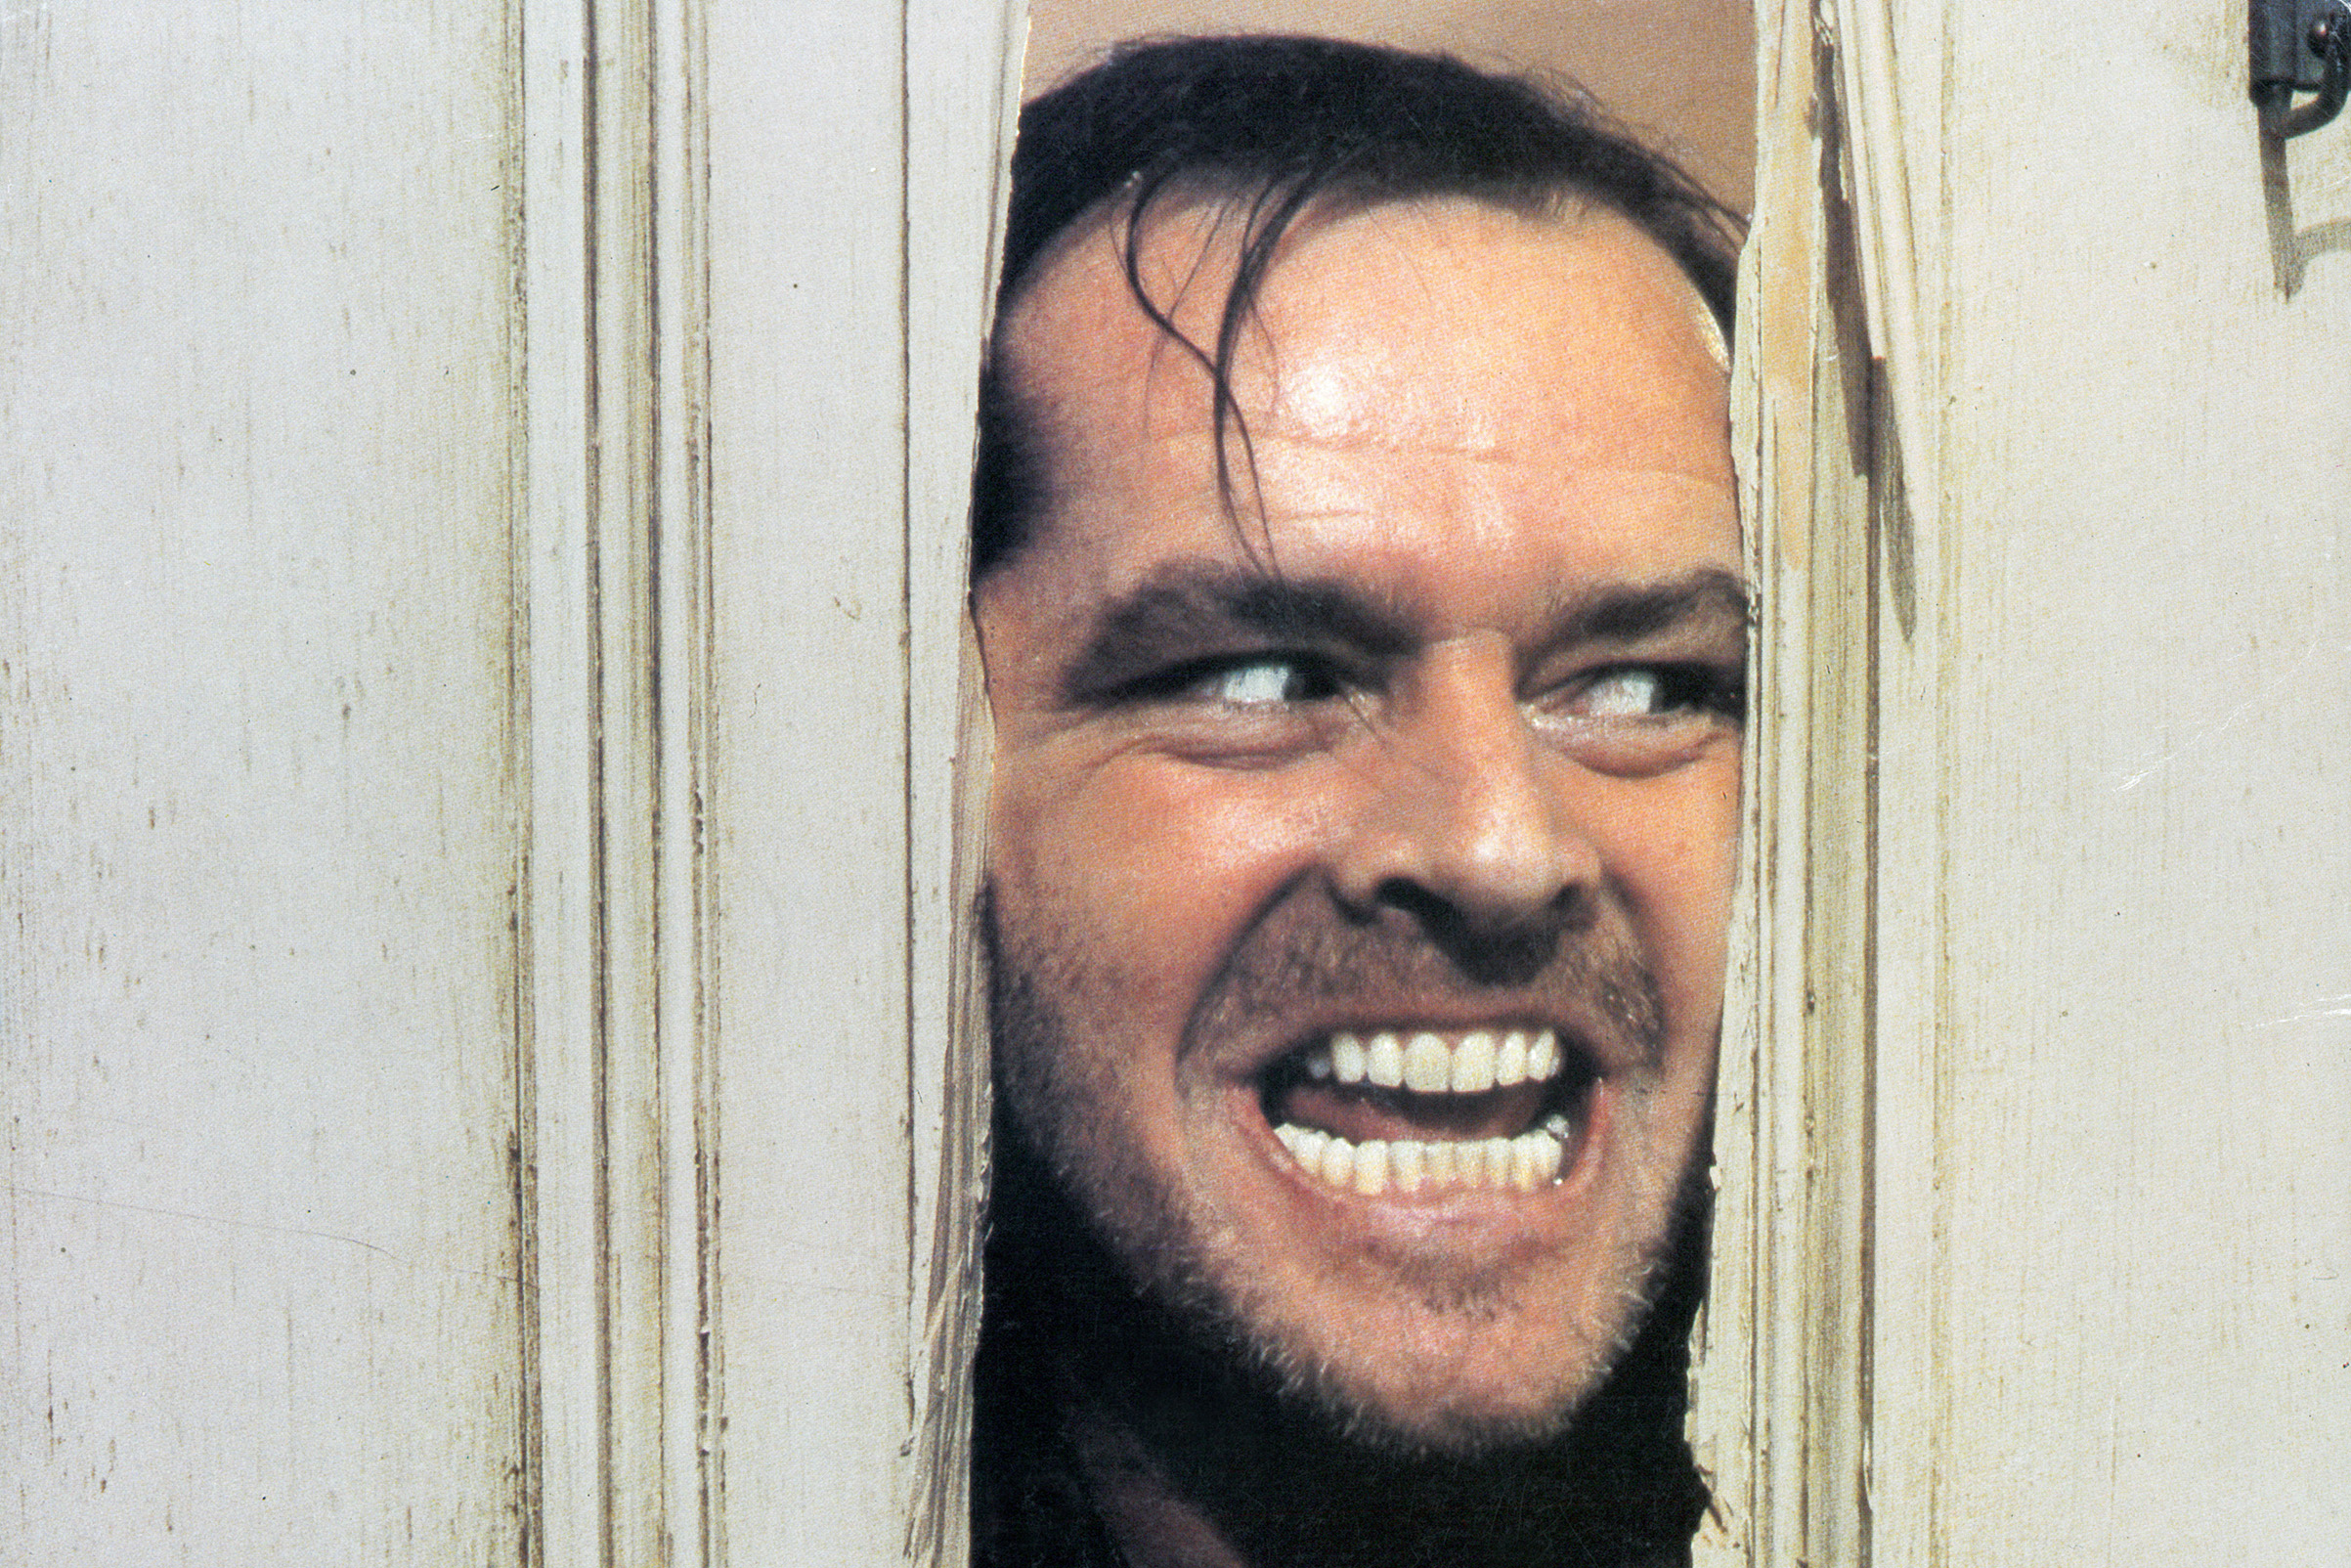 Jack Nicholson in the film 'The Shining', 1980. (Archive Photos/Getty Images)